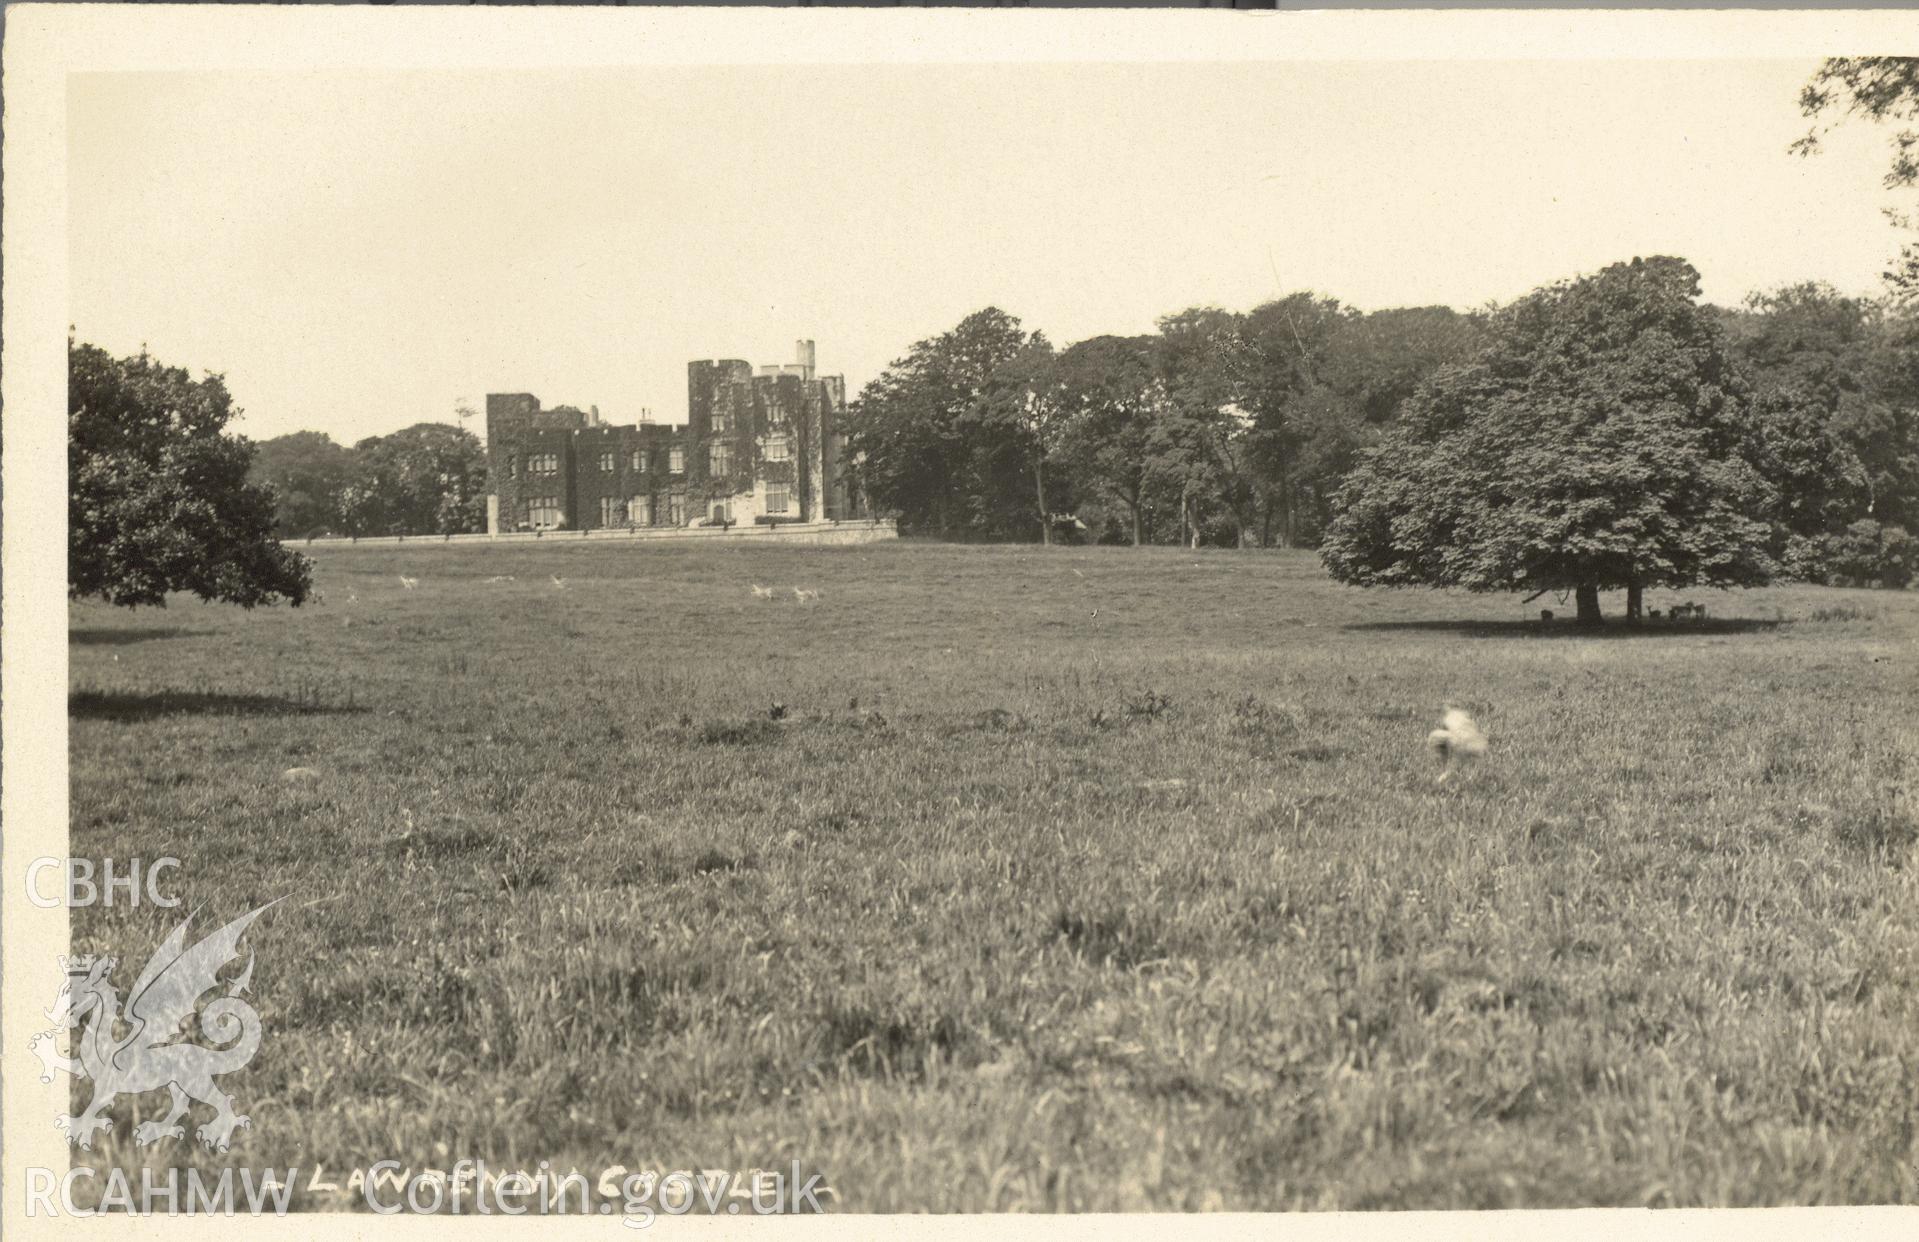 Digitised postcard image of Lawrenny Castle, S.J. Allen, Photographer, Pembroke Dock. Produced by Parks and Gardens Data Services, from an original item in the Peter Davis Collection at Parks and Gardens UK. We hold only web-resolution images of this collection, suitable for viewing on screen and for research purposes only. We do not hold the original images, or publication quality scans.